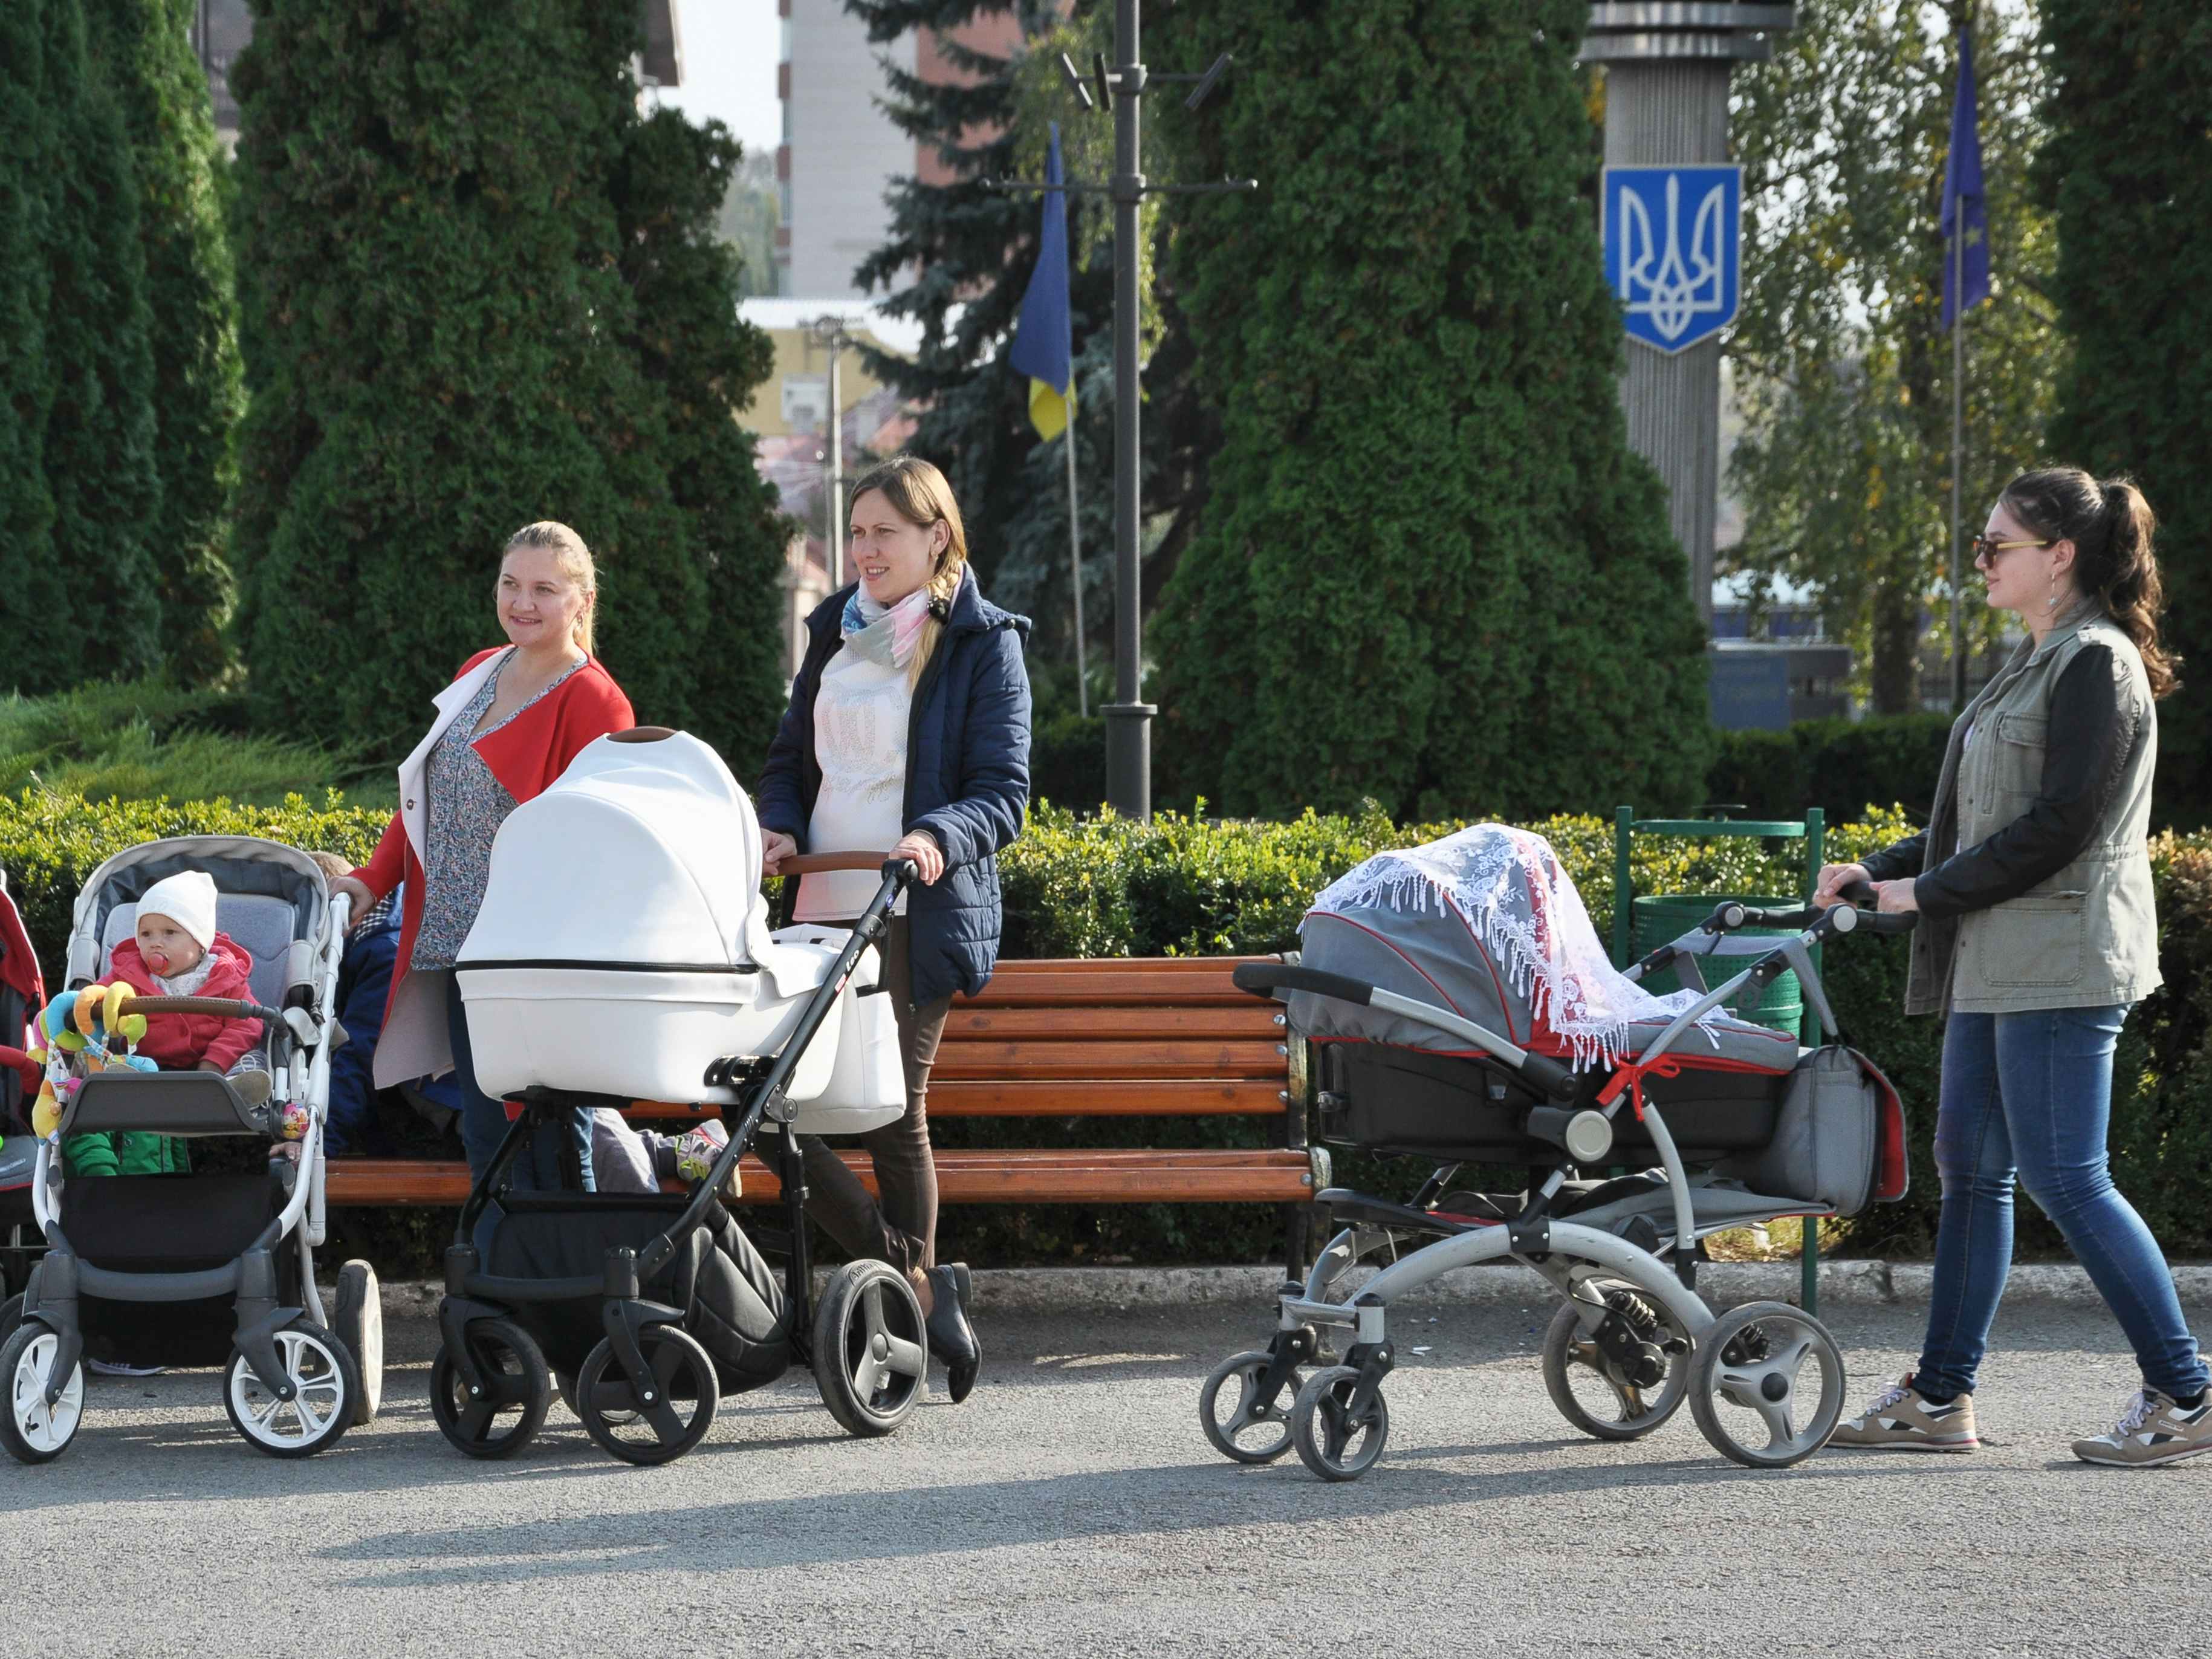 Mothers pushing strollers while visiting an amusement park.